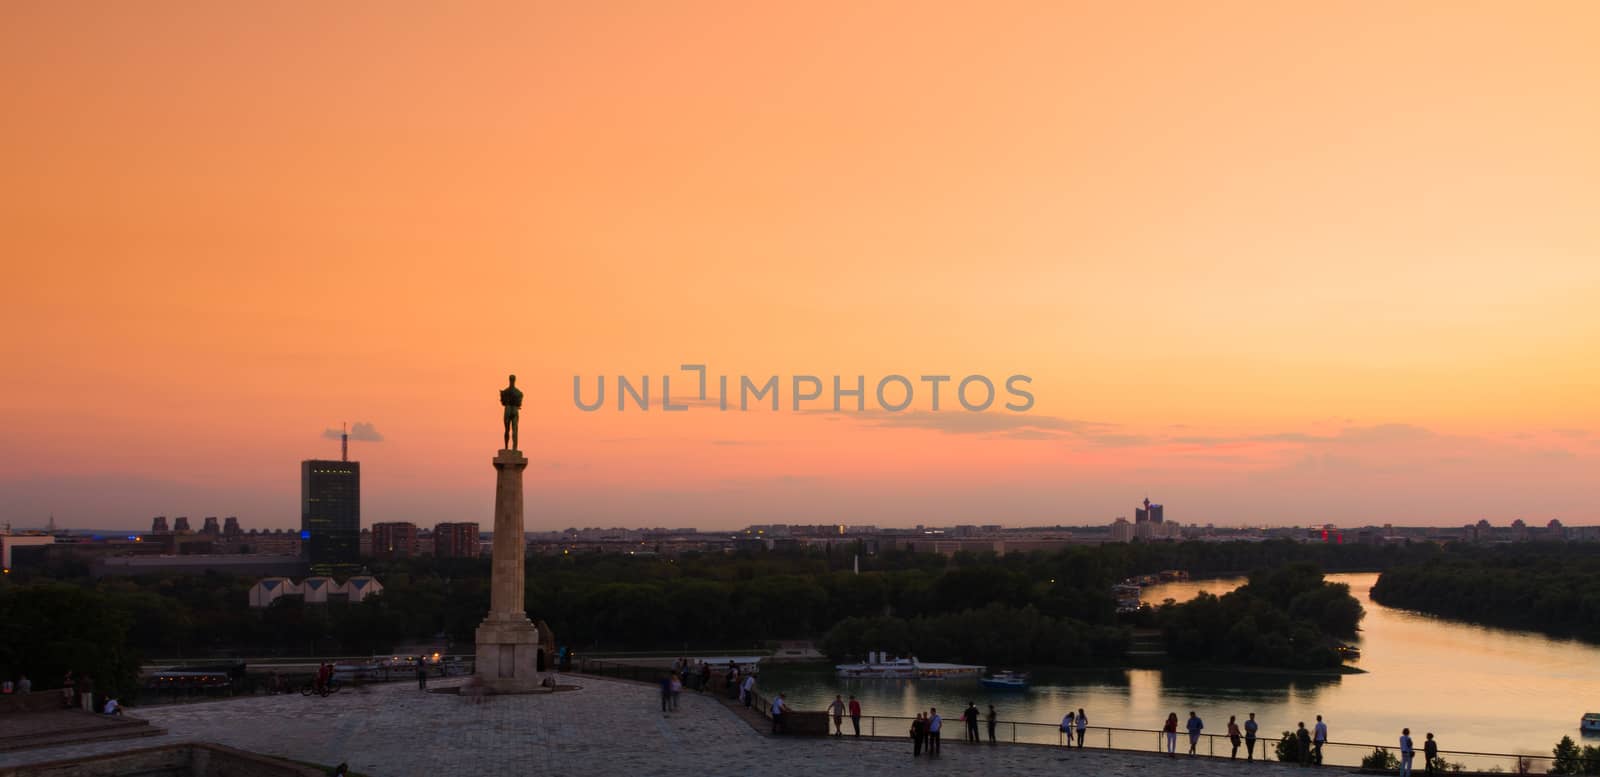 Statue of the Victor or Statue of Victory is a monument in the Kalemegdan fortress in Belgrade, erected on 1928 to commemorate the Kingdom of Serbia's war victories over the Ottoman Empire and Austria-Hungary. It is most famous works of Ivan Mestrovic.